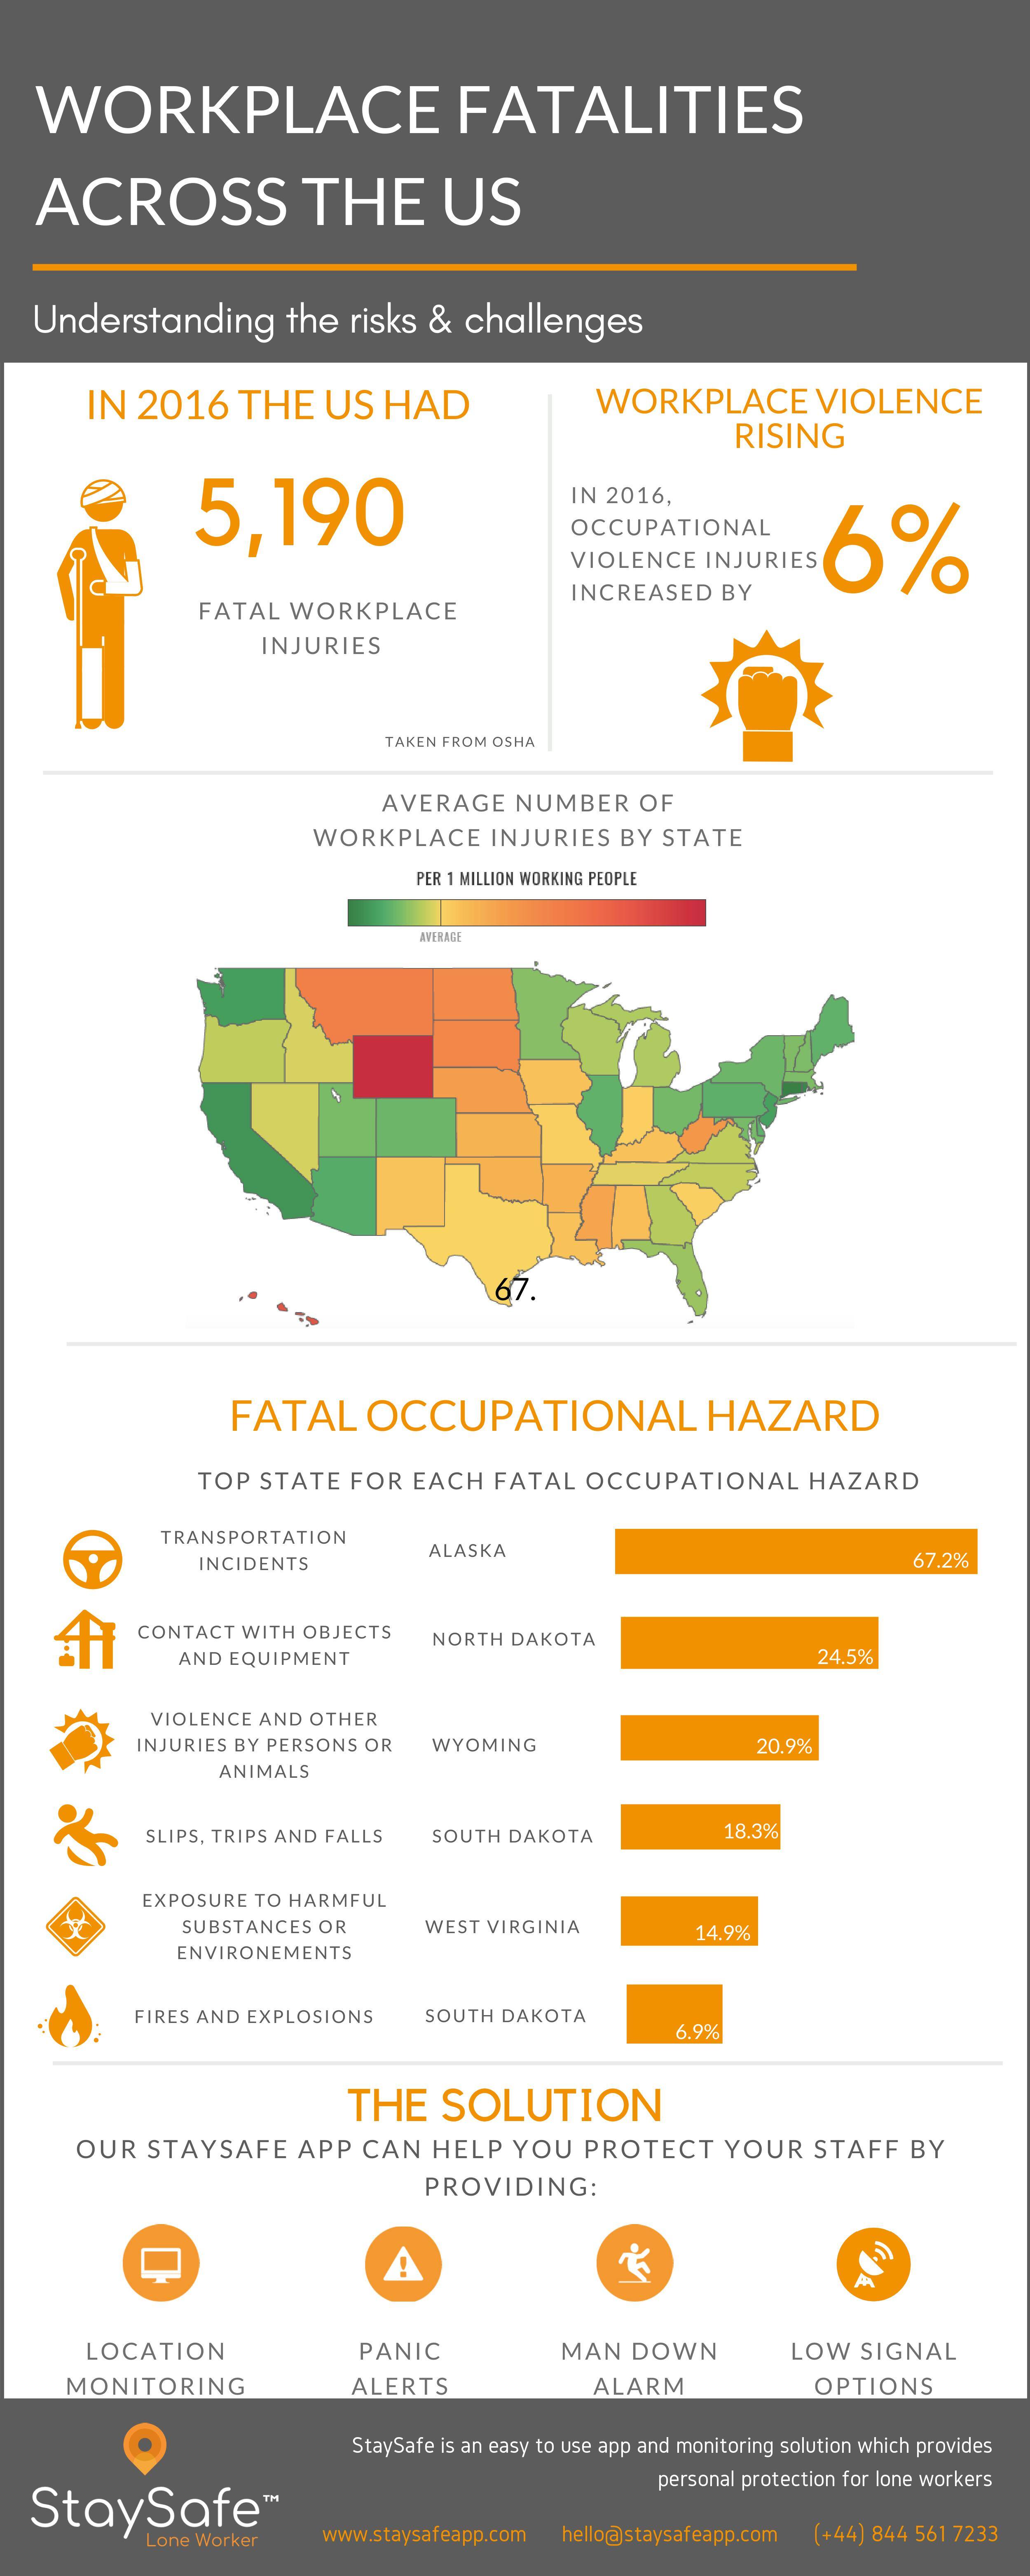 Infographic with information about workplace fatalities in the US